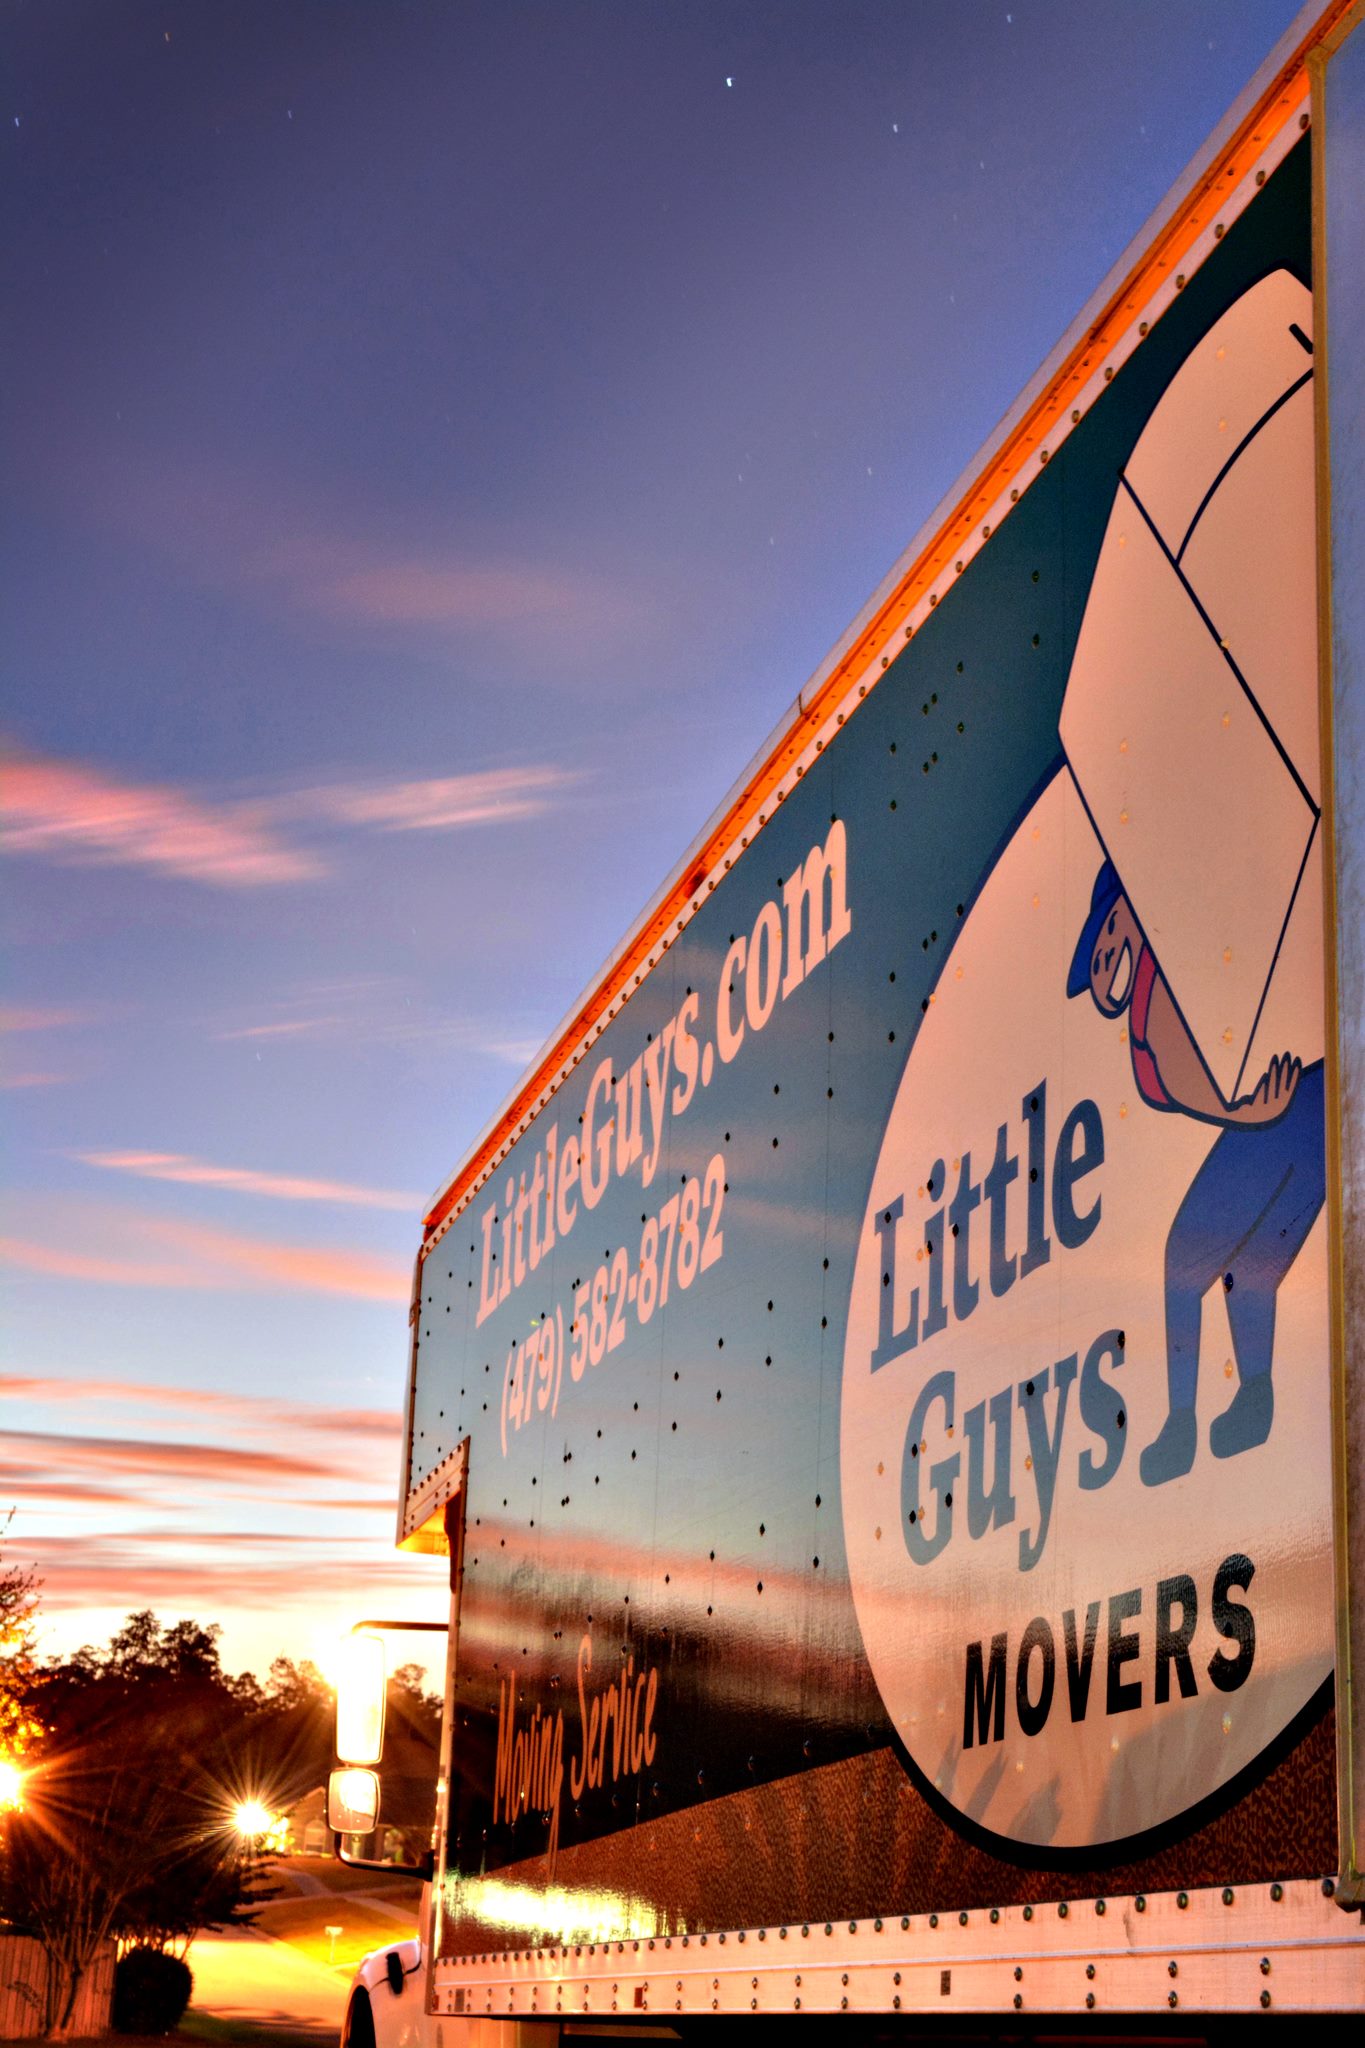 Little Guys Movers truck in front of sunset